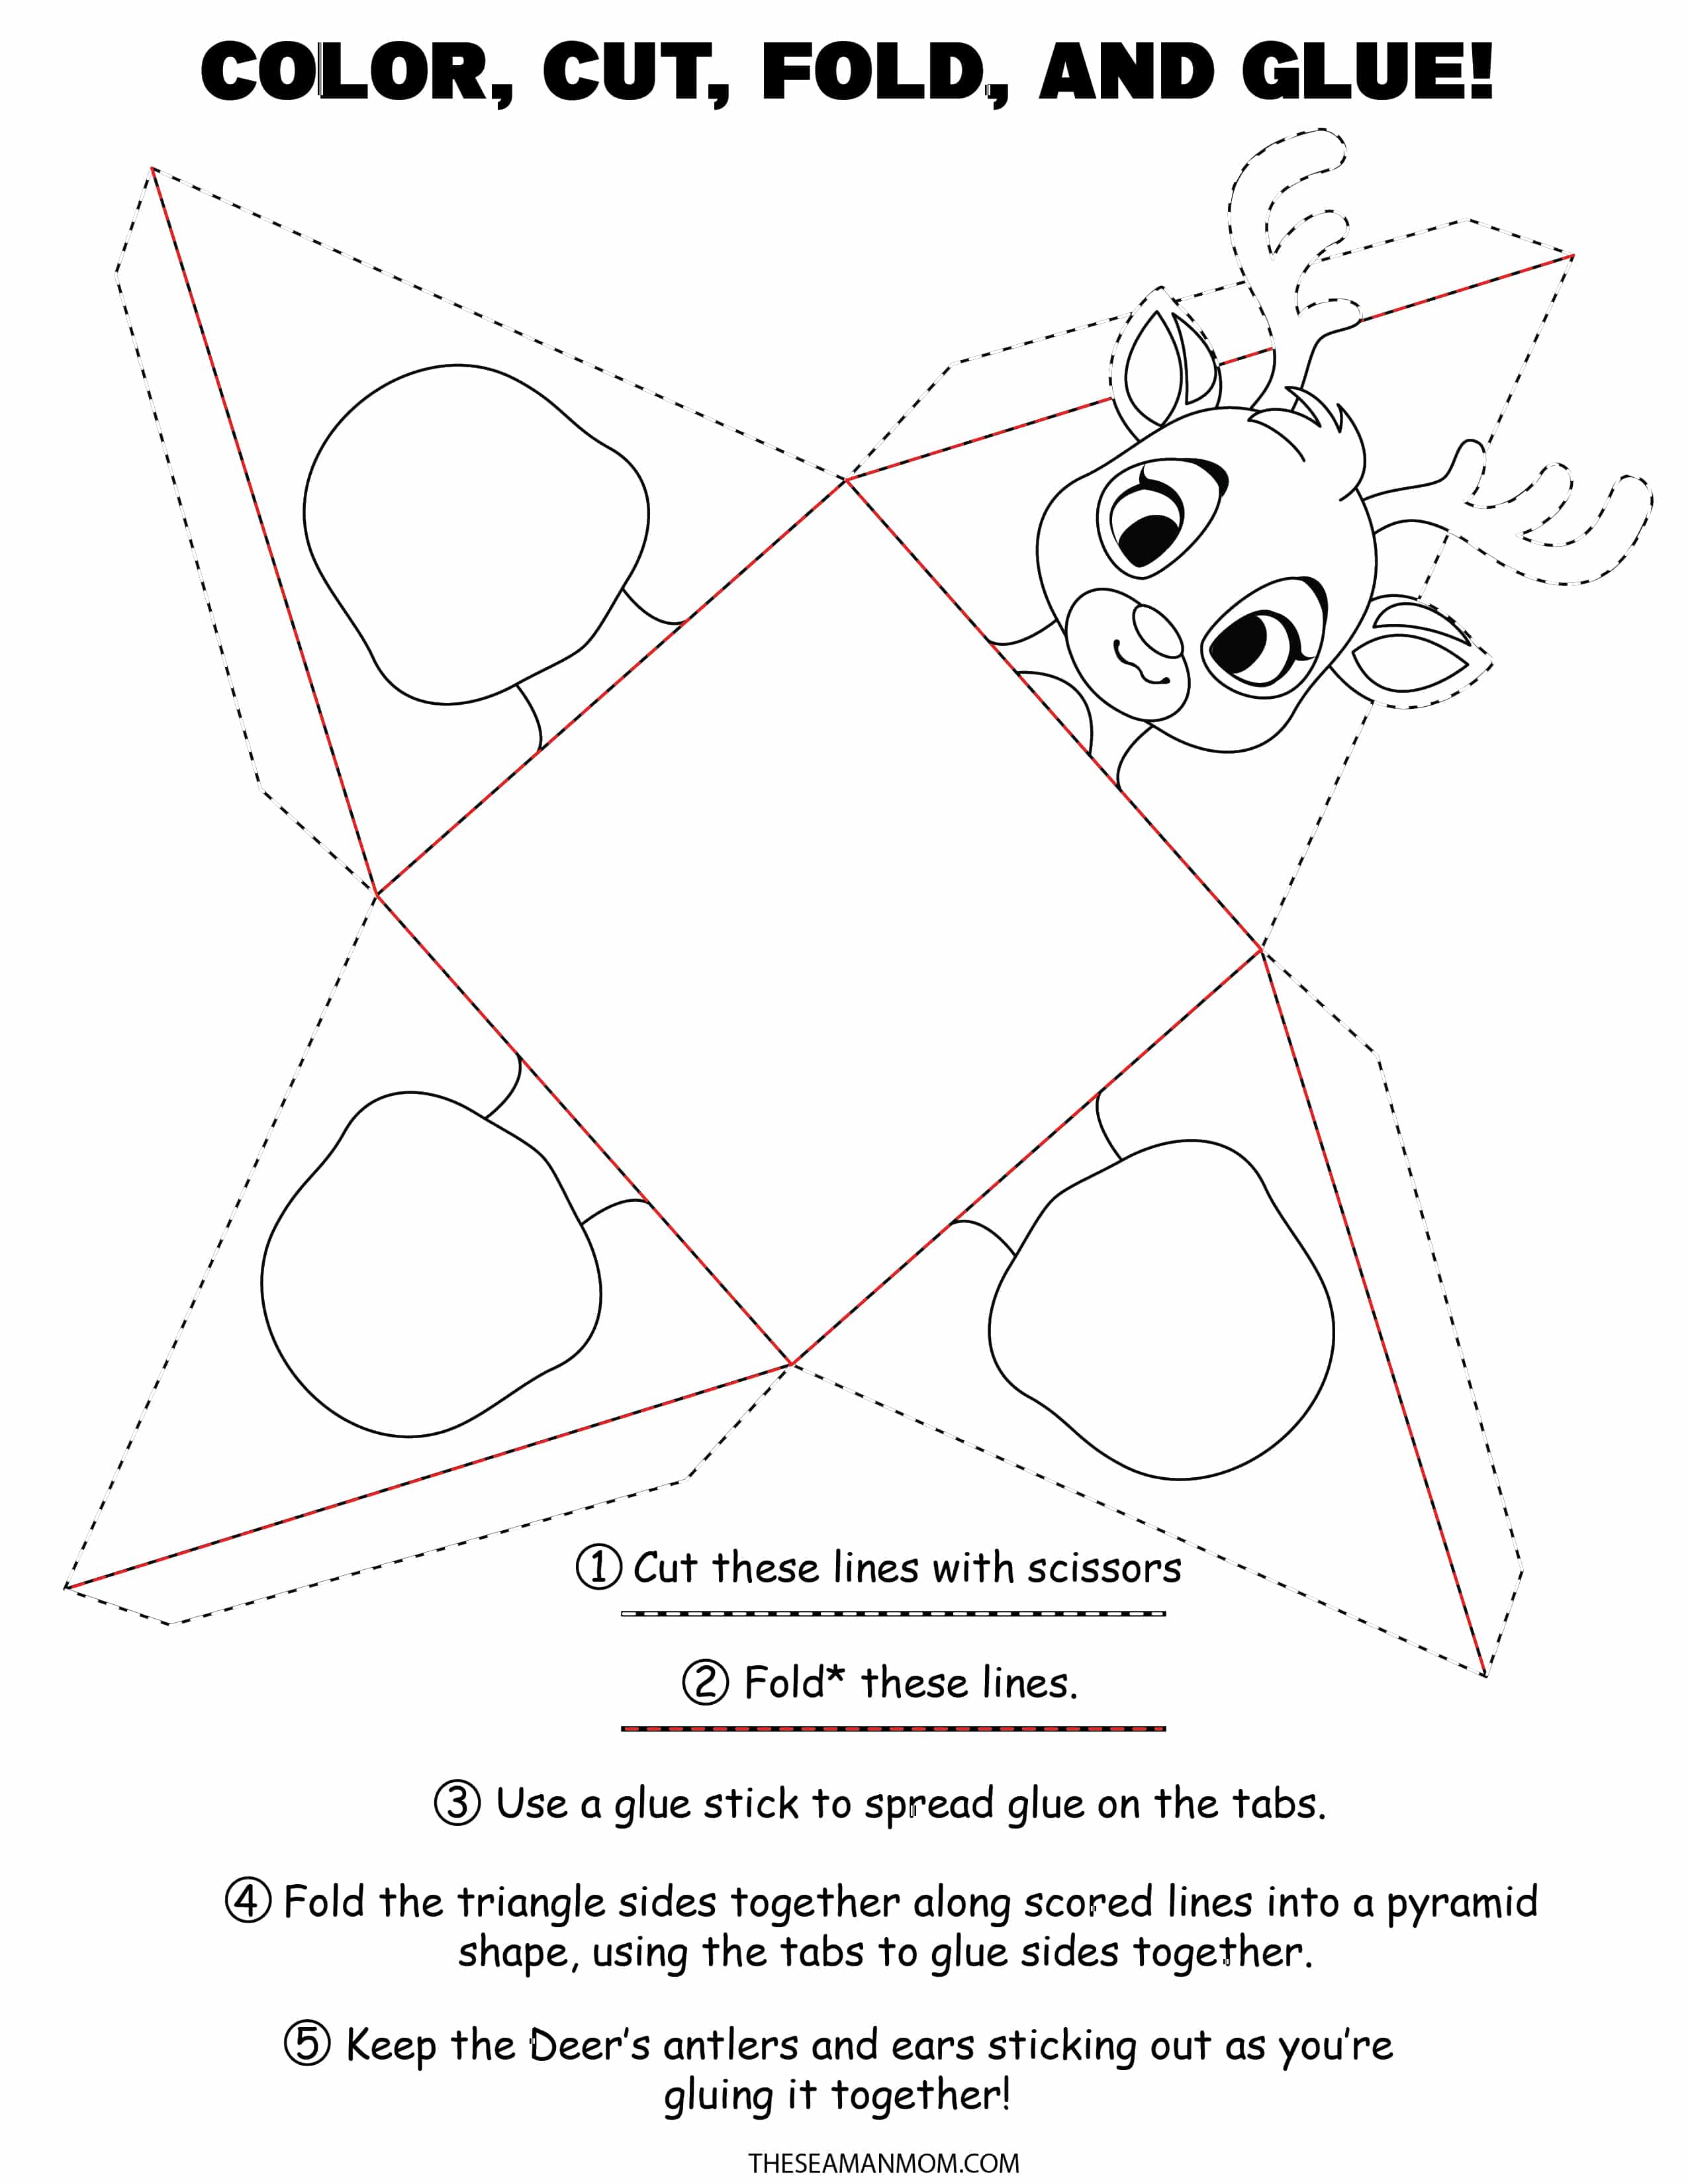 Printable reindeer ornaments to color, cut, fold and glue and make your own tree ornaments